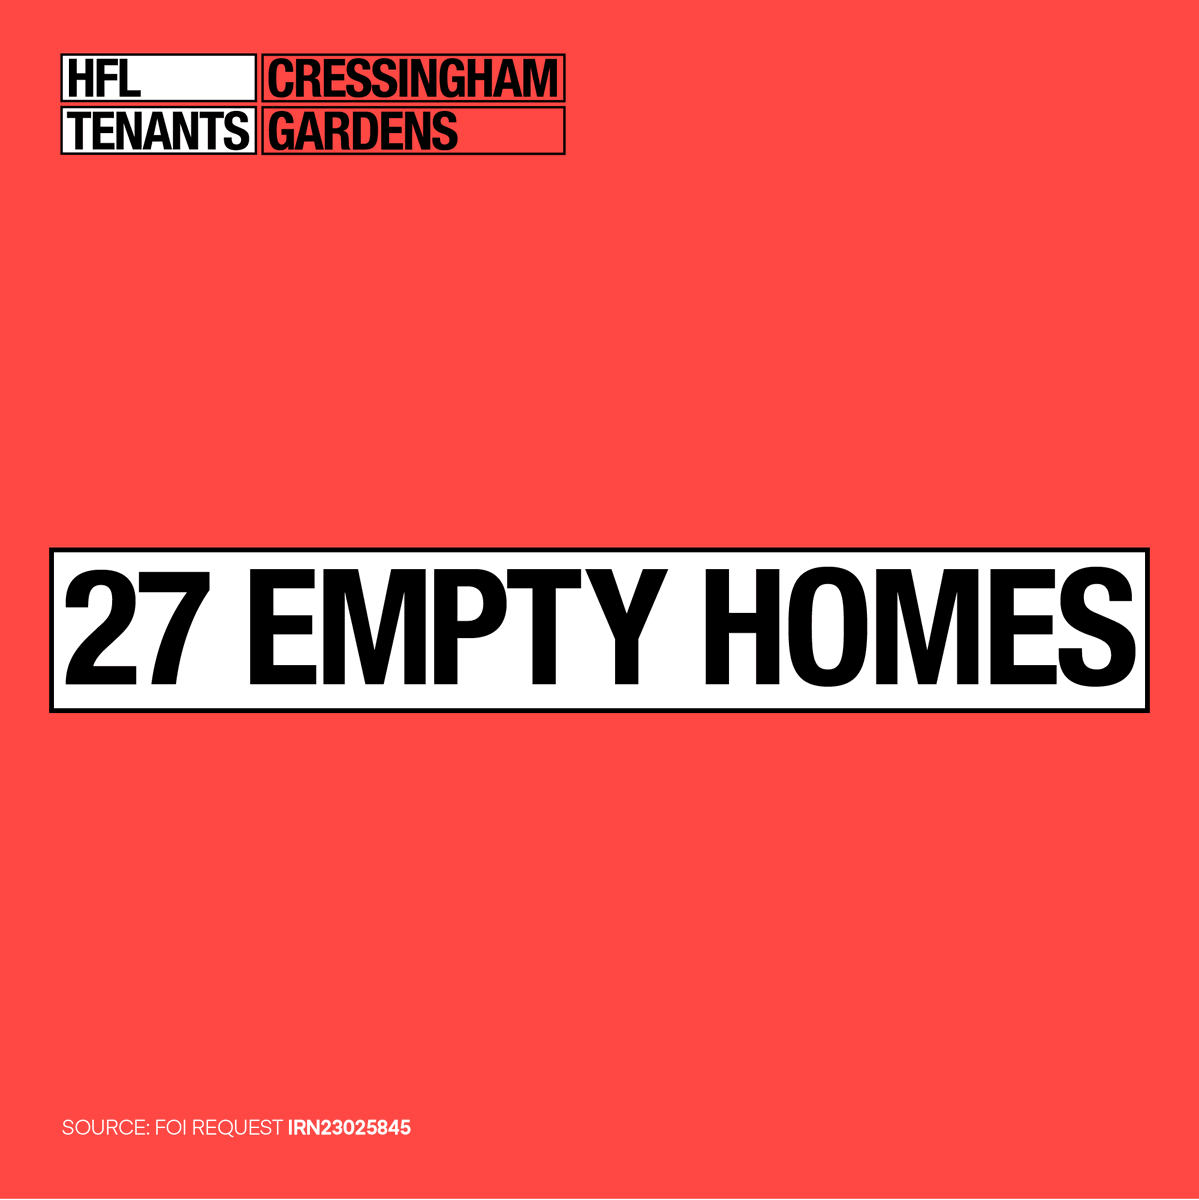 27 council-owned homes stand empty at Cressingham Gardens Estate while 16 of its families are being forced to move out by Lambeth council. #peoplenotnumbers